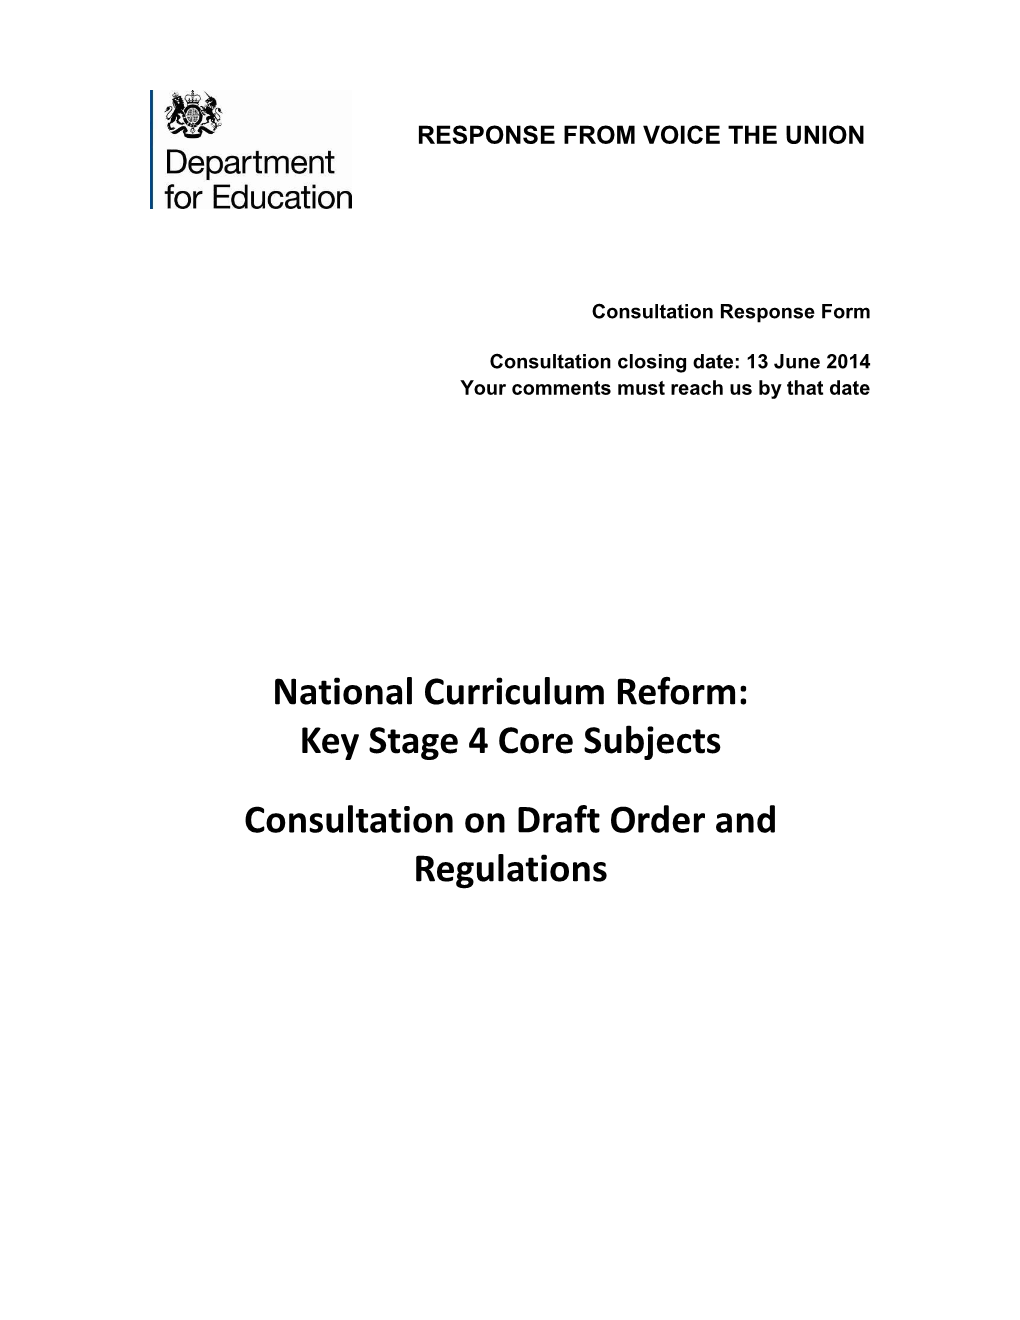 National Curriculum Reform: Key Stage 4 Core Subjects Consultation